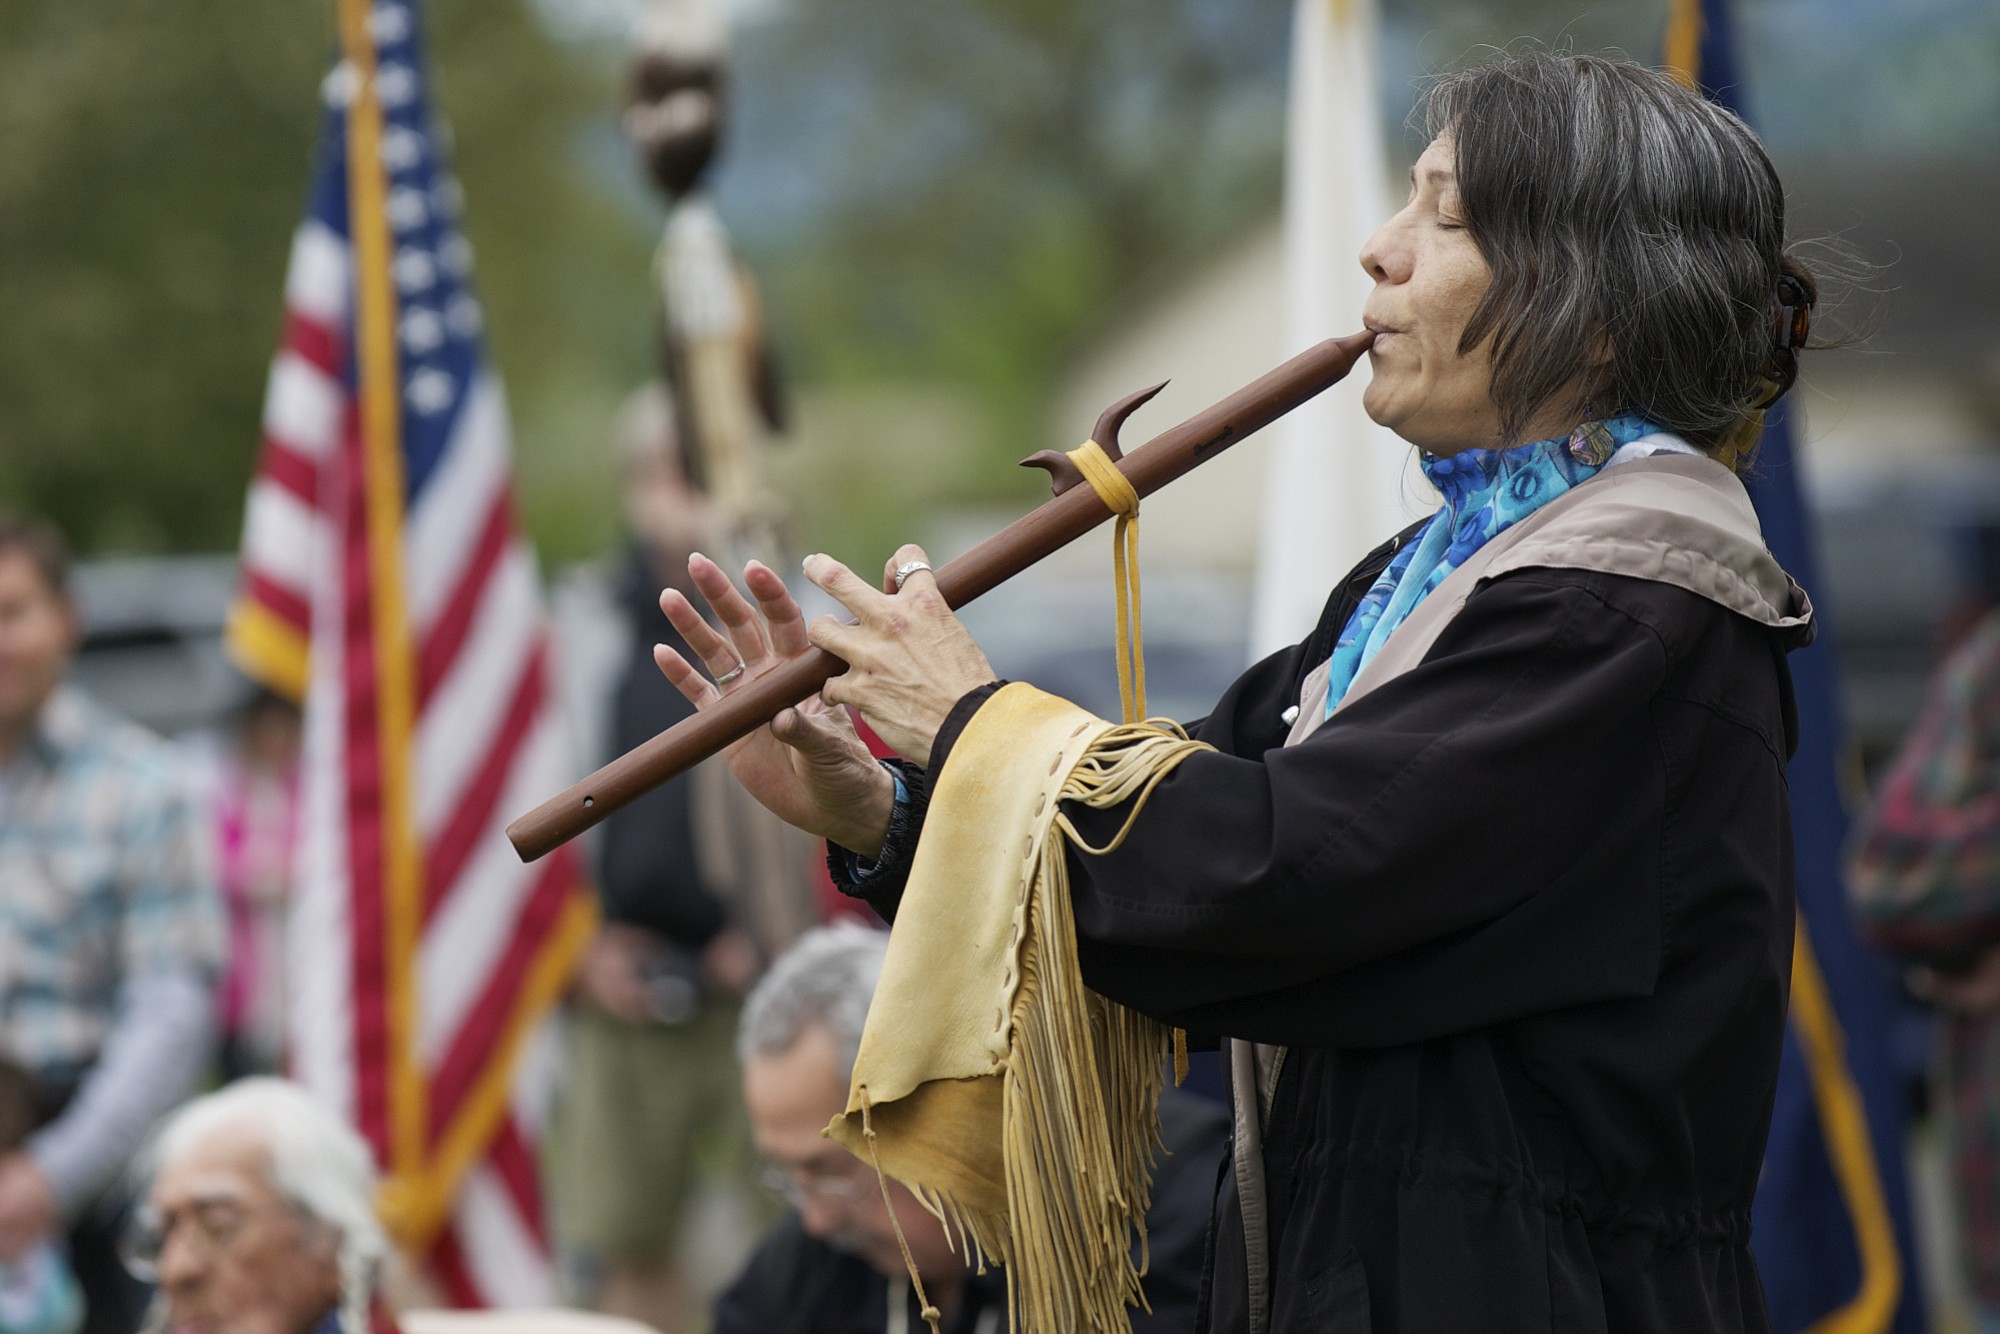 Katherine Quartz from the Walker River Paiute tribe plays the flute song &quot;Waterflow&quot; to honor the infant son of Little Bear during the 16th annual Nez Perce Chief Redheart Memorial Ceremony at the Fort Vancouver National Historic Reserve.